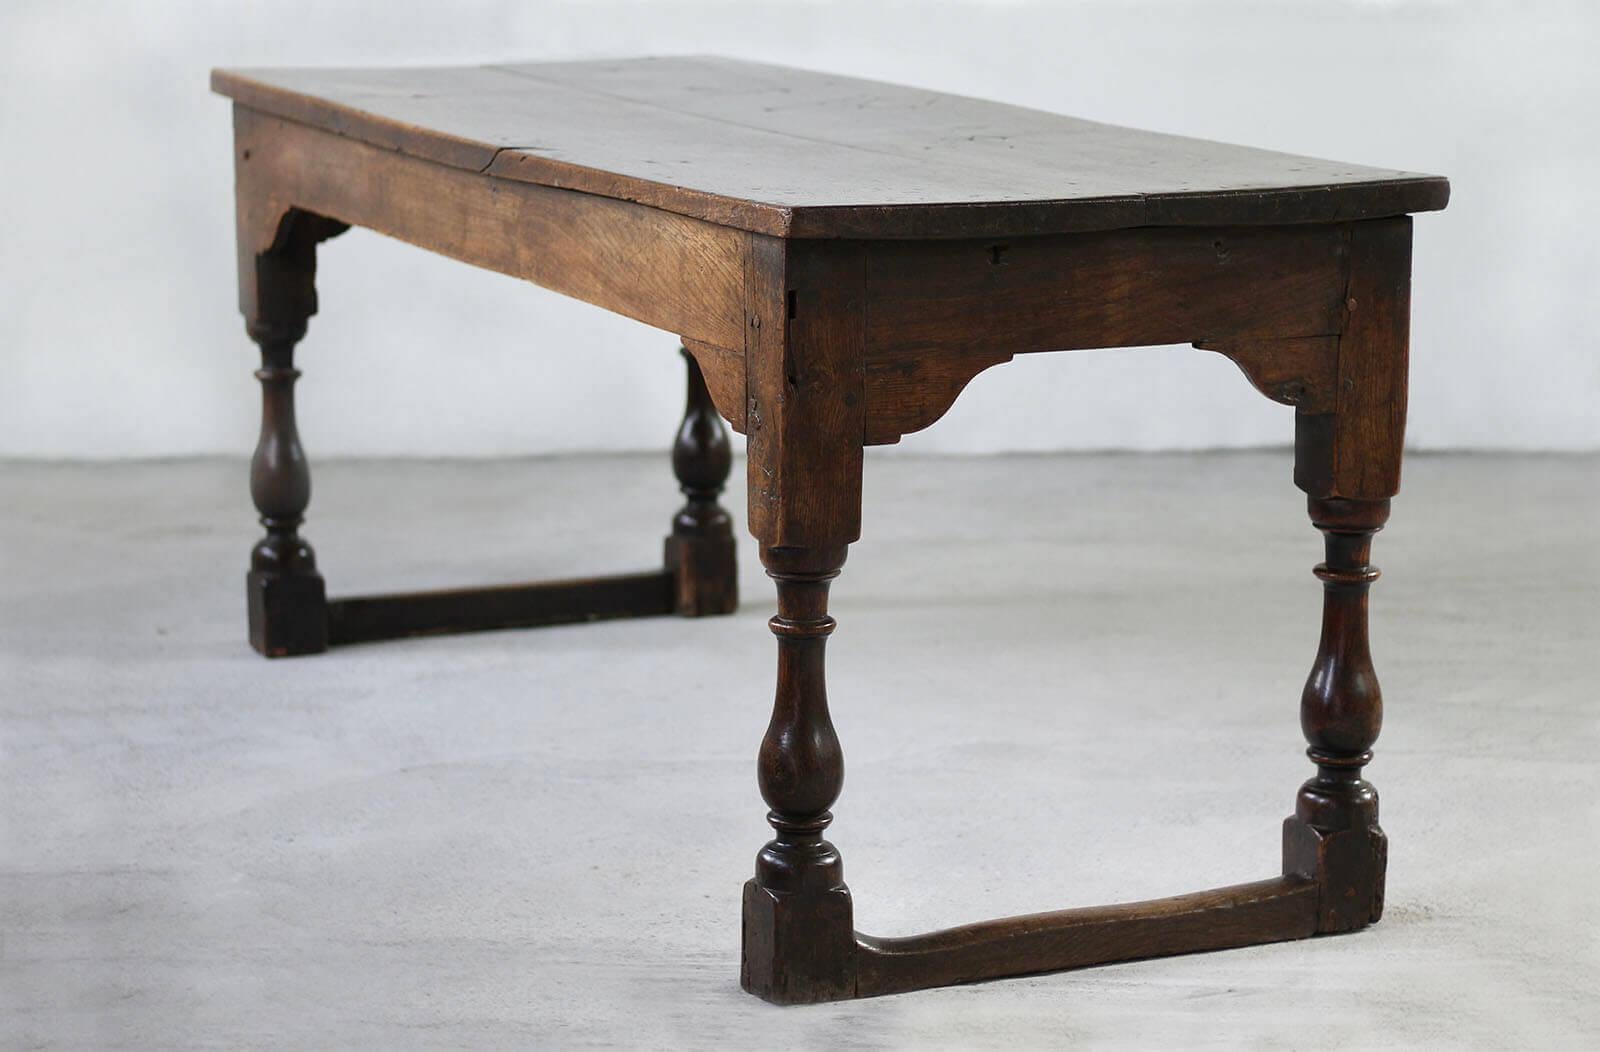 This gorgeous table was probably made circa 19th Century in England, exuding a distinct charm that captures the essence of English craftsmanship.  It has acquired some unique patina over years of use that bears witness to its journey through time.